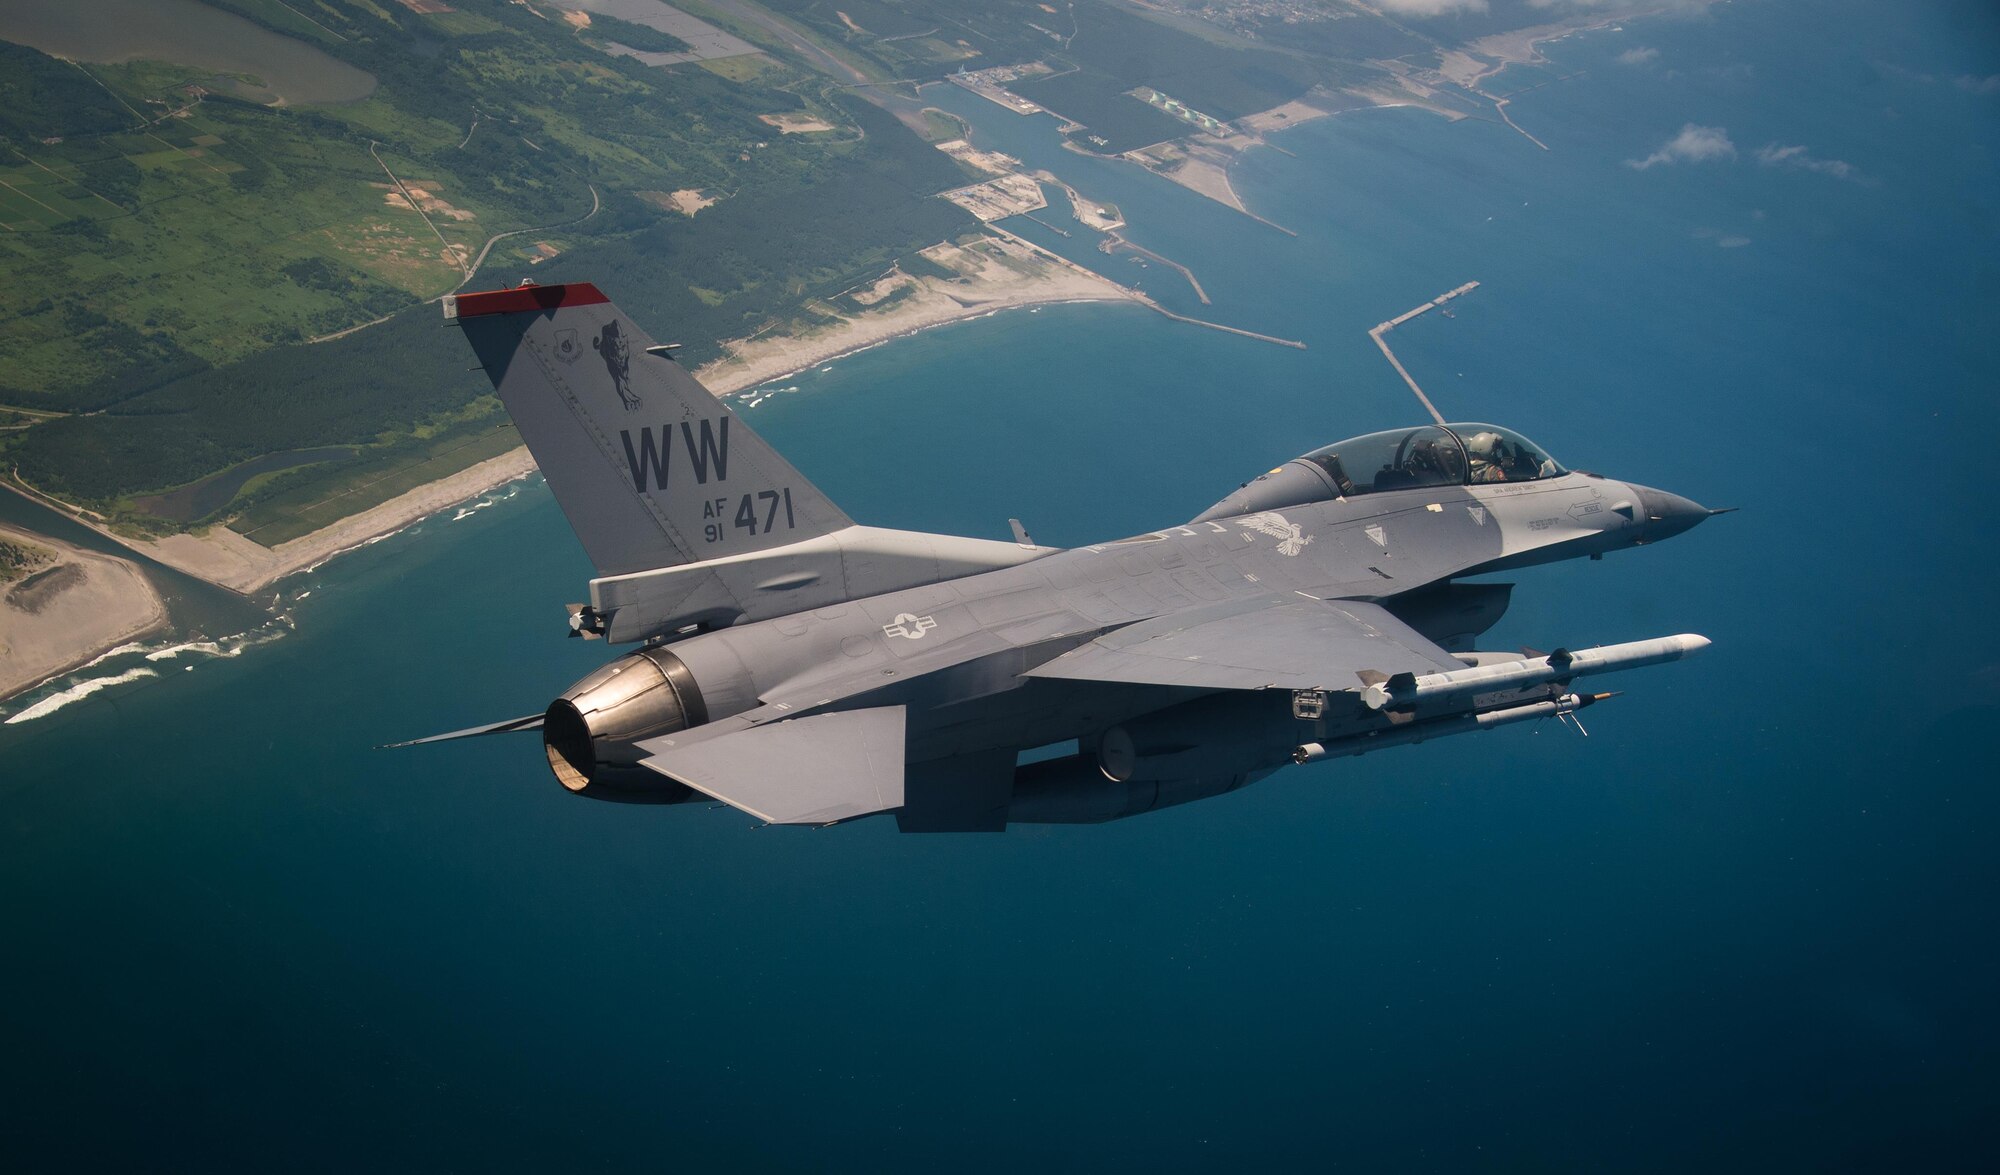 U.S. Air Force Capt. David Neville, a 13th Fighter Squadron F-16 Fighting Falcon pilot, conducts a flight sortie above northern Japan, June 12, 2017. Neville and other 13th and 14th Fighter Squadron pilots joined Kadena Air Base, Japan, F-15C Eagle pilots to conduct air-to-air coverage and suppression of enemy air defense procedures during an aviation relocation training. (U.S. Air Force photo by Staff Sgt. Deana Heitzman)